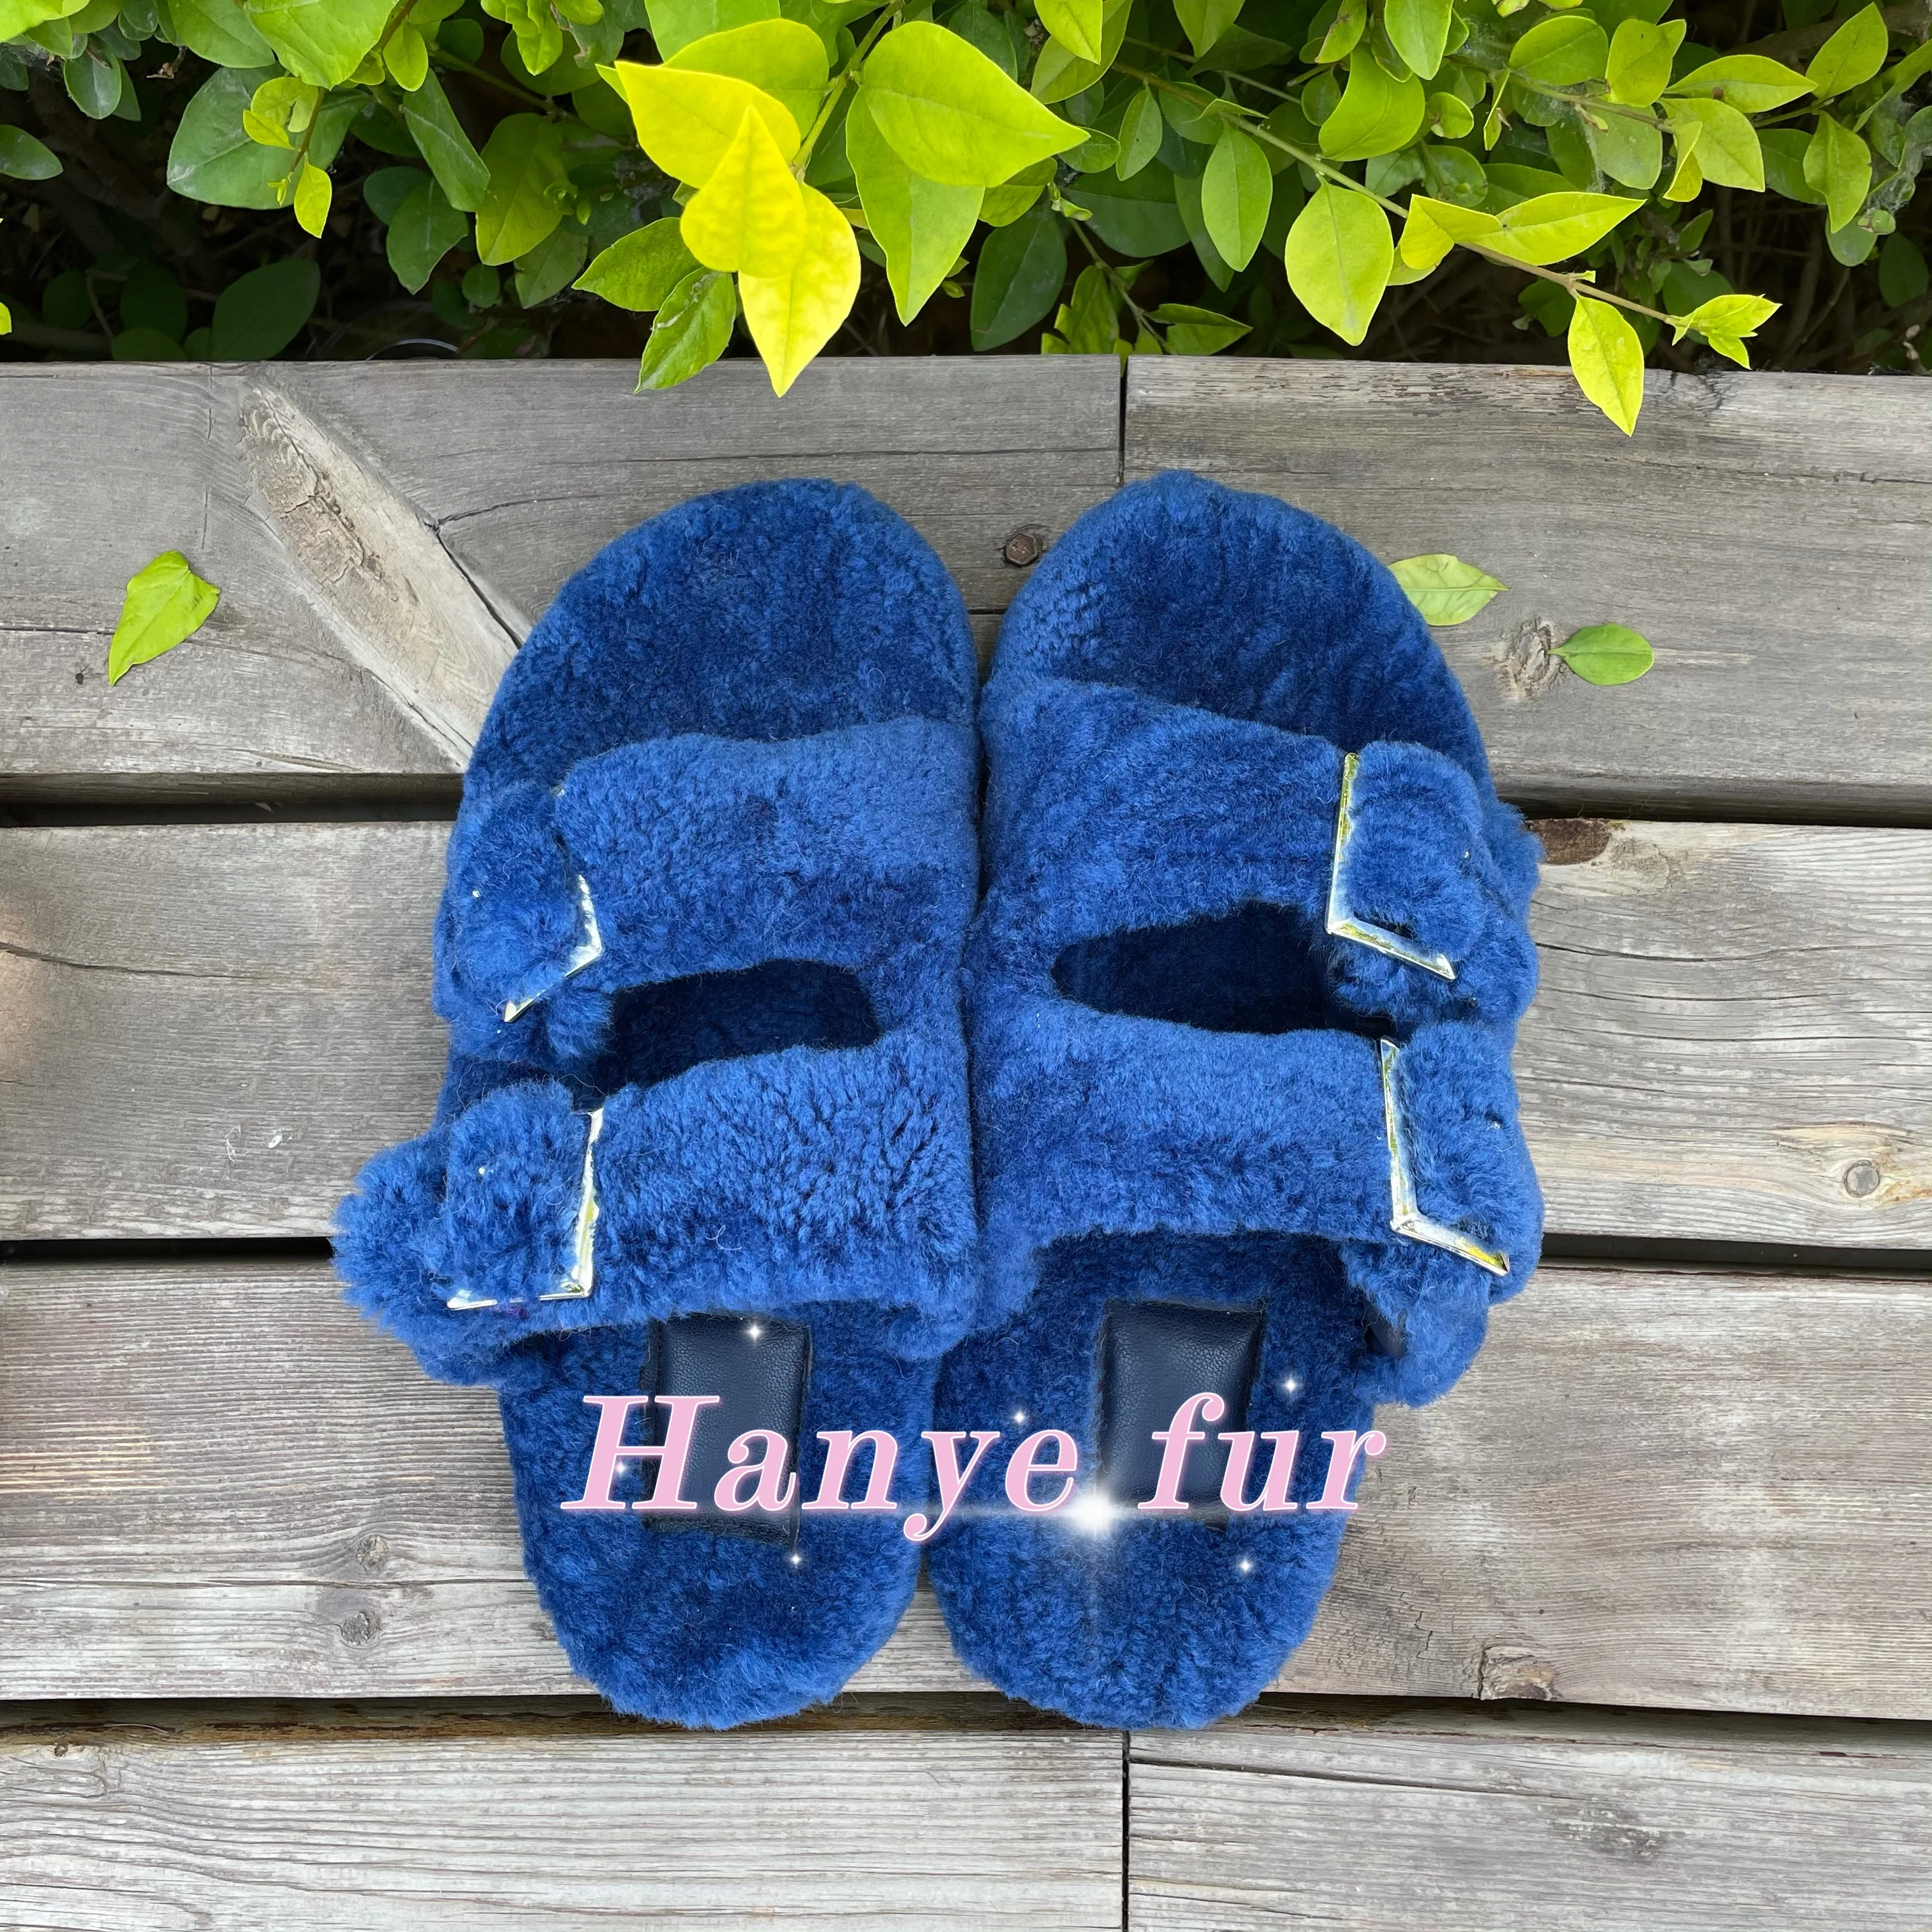 

The latest and most popular high-quality ladies winter warm family slippers designer sheepskin soft house fur slippers shoes wom, Customized color